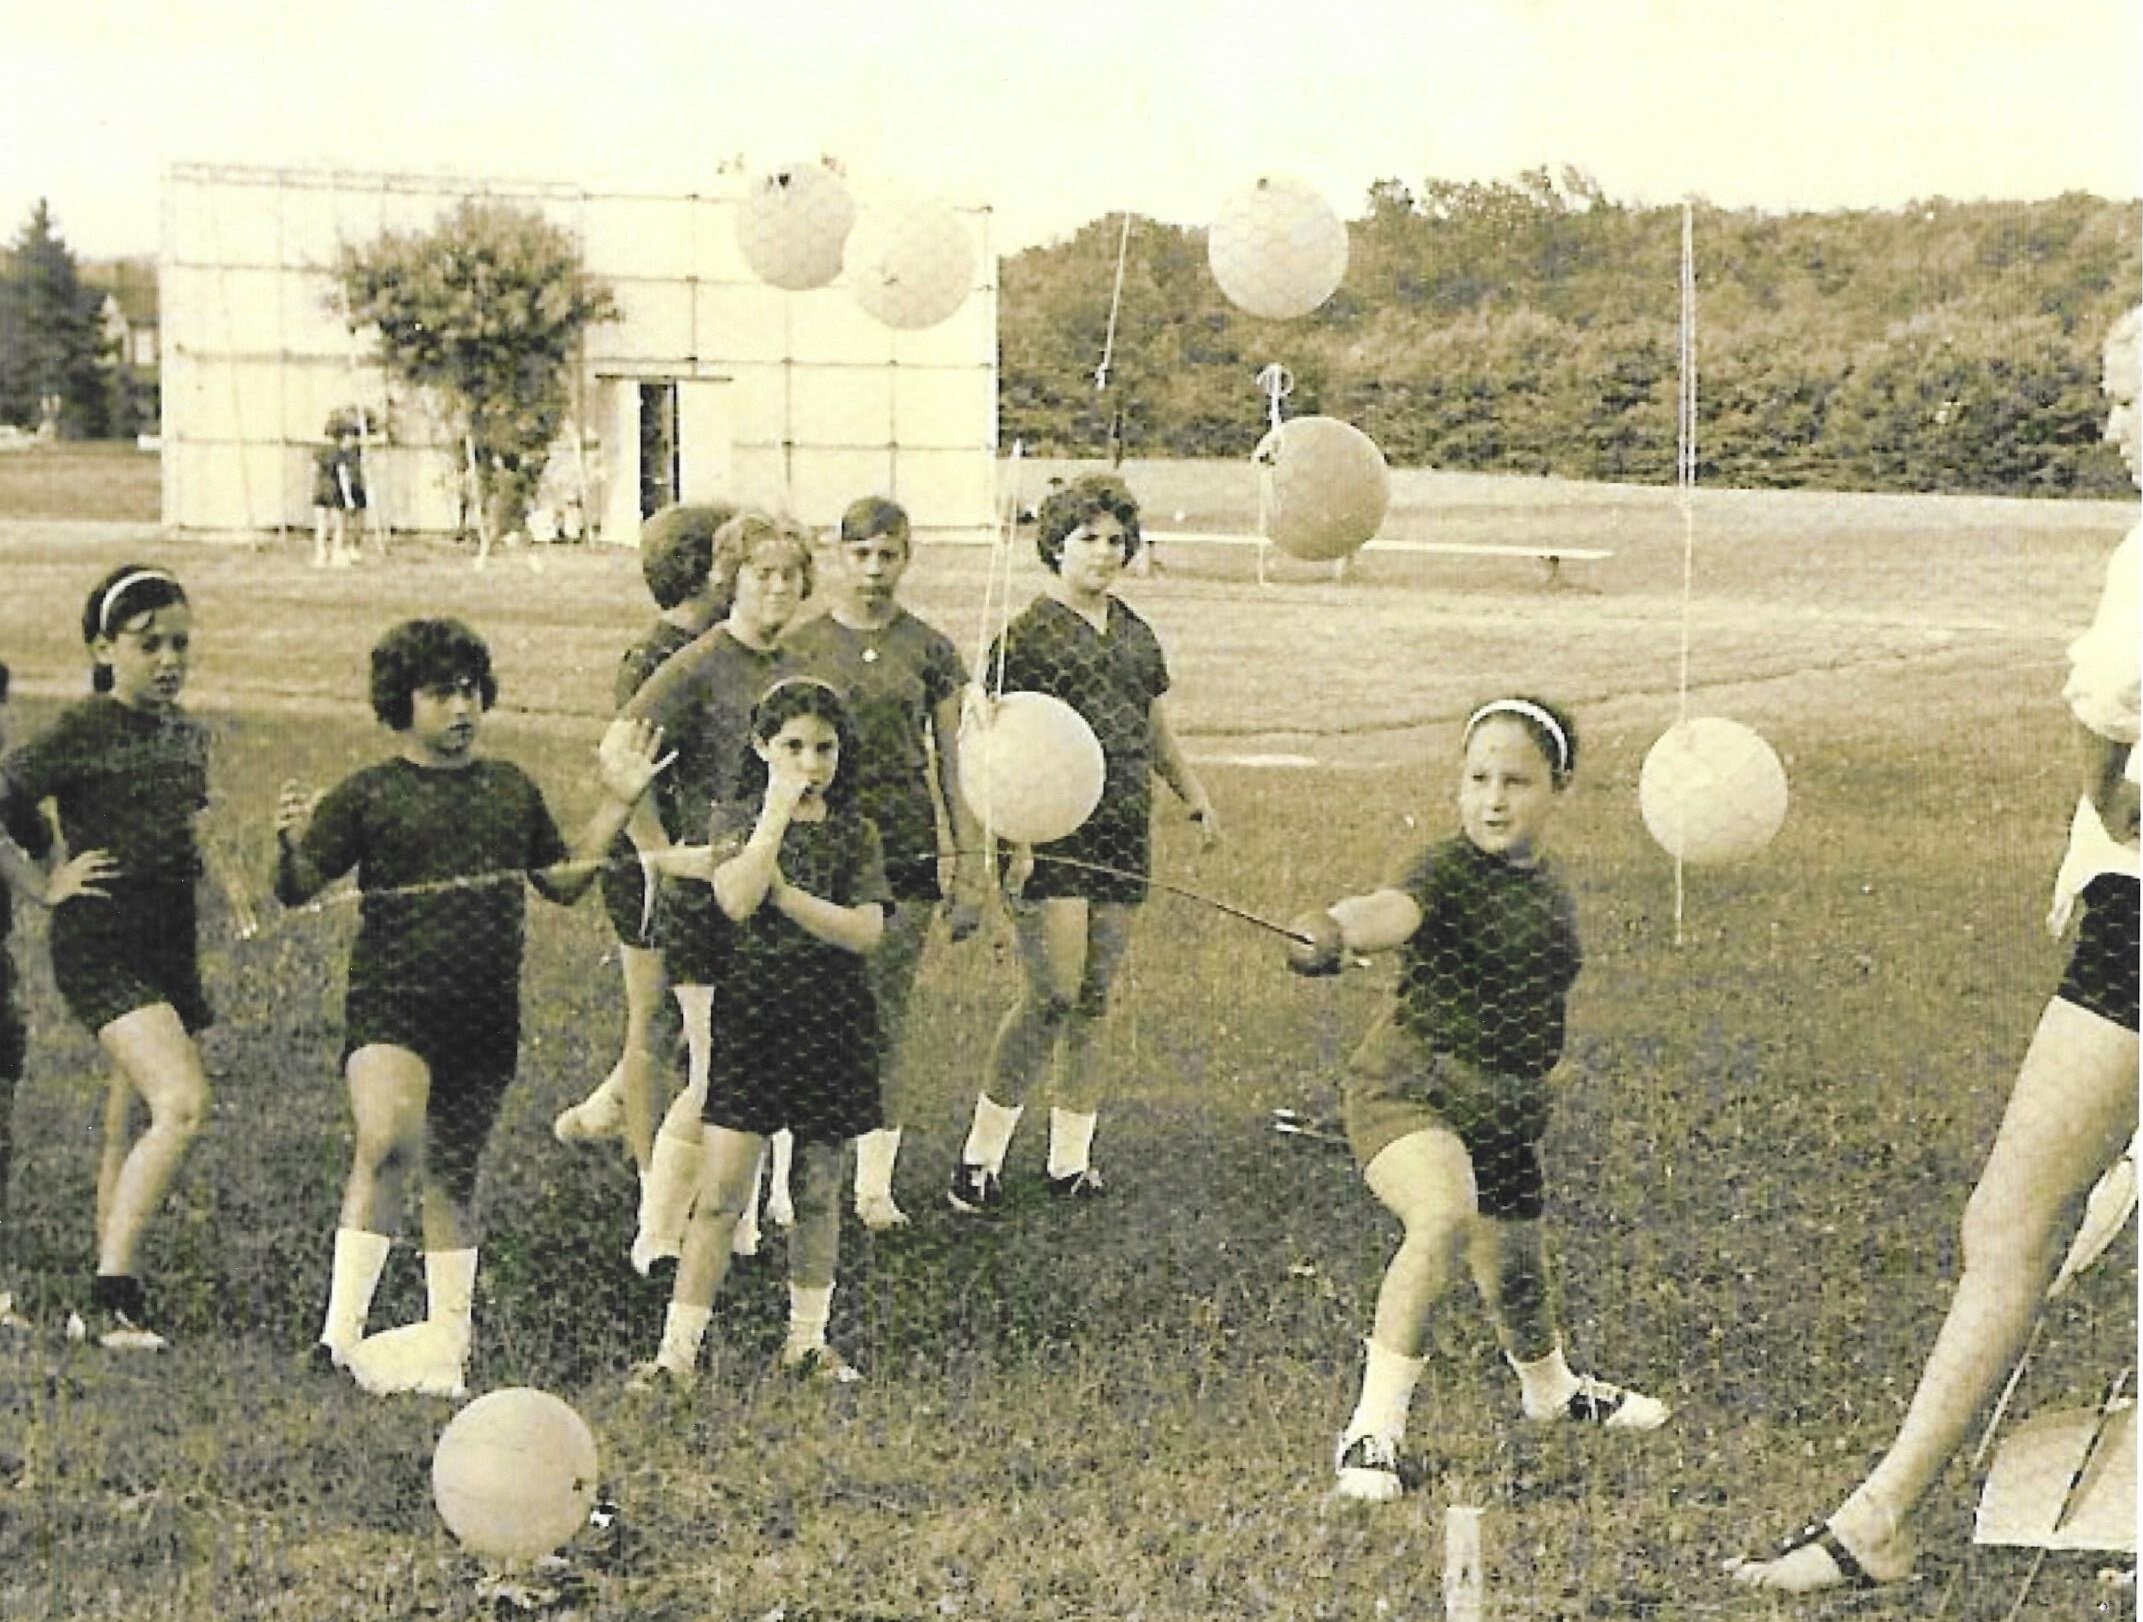 1950s—fencing on the girls’ athletics fields. Green (not white) t-shirts for the uniform and the campers are wearing saddle shoes.